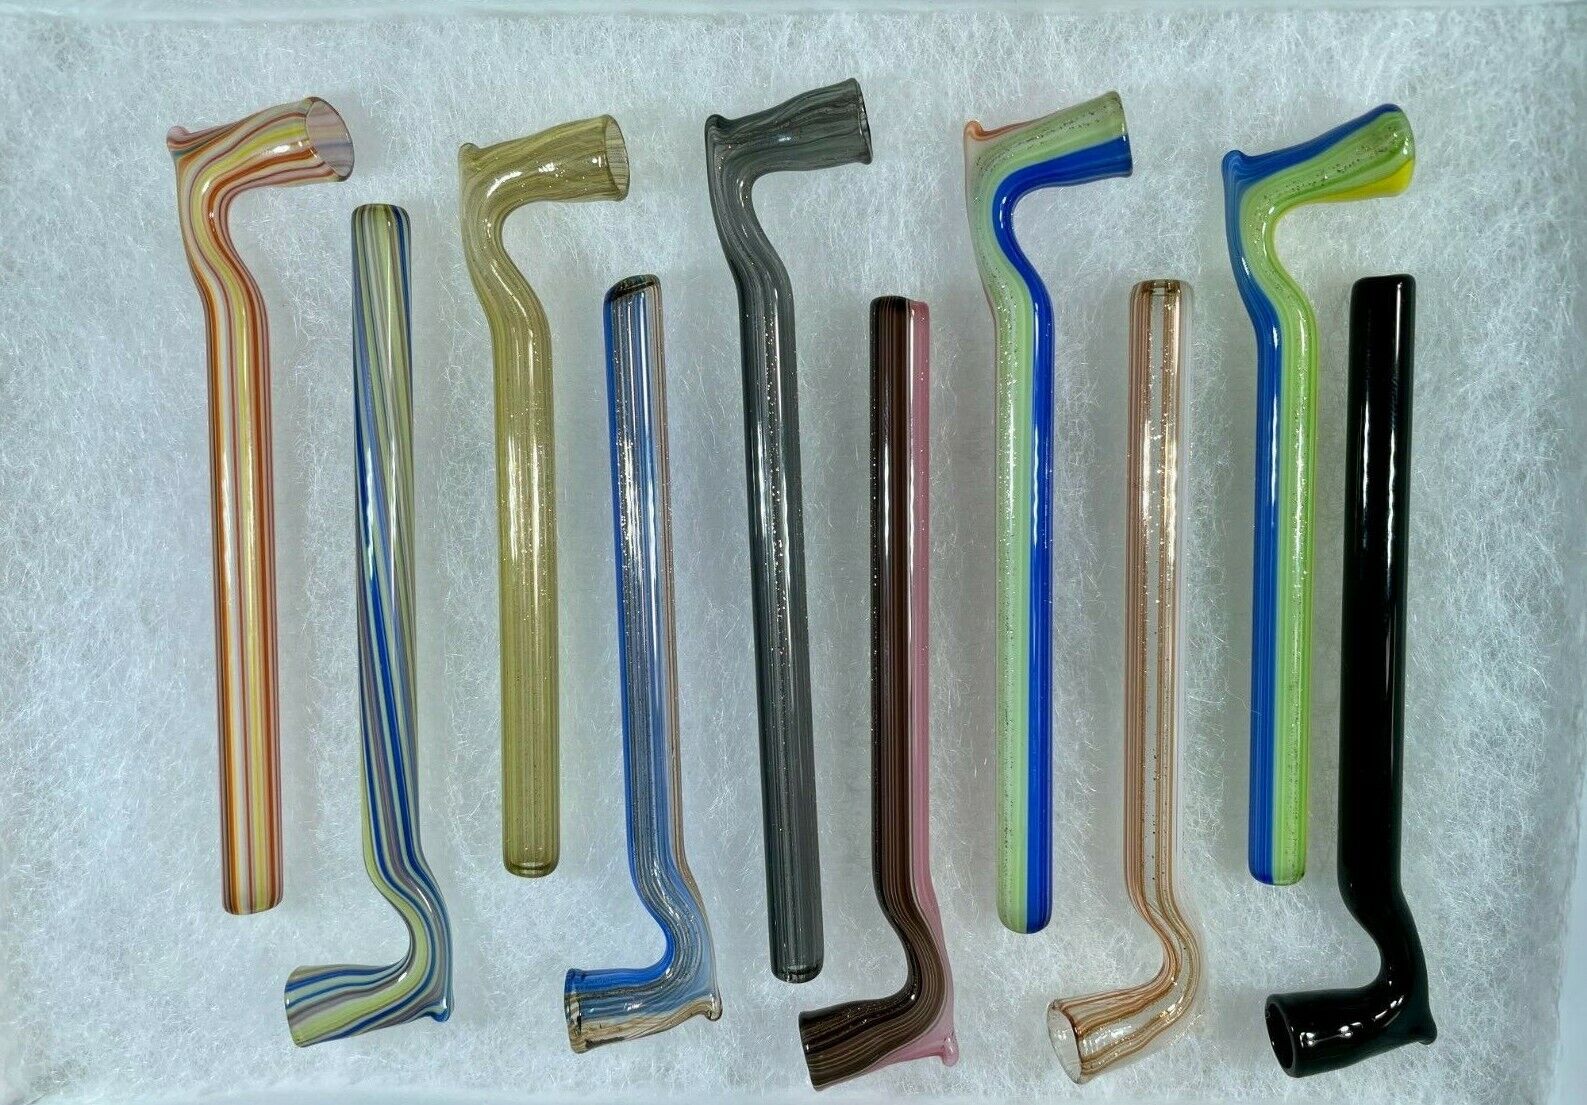 10 PCS LOT COLOR SLIM GLASS PIPE TOOBACO SMOKING PIPES COLLECTIBLE WHOLESALE 